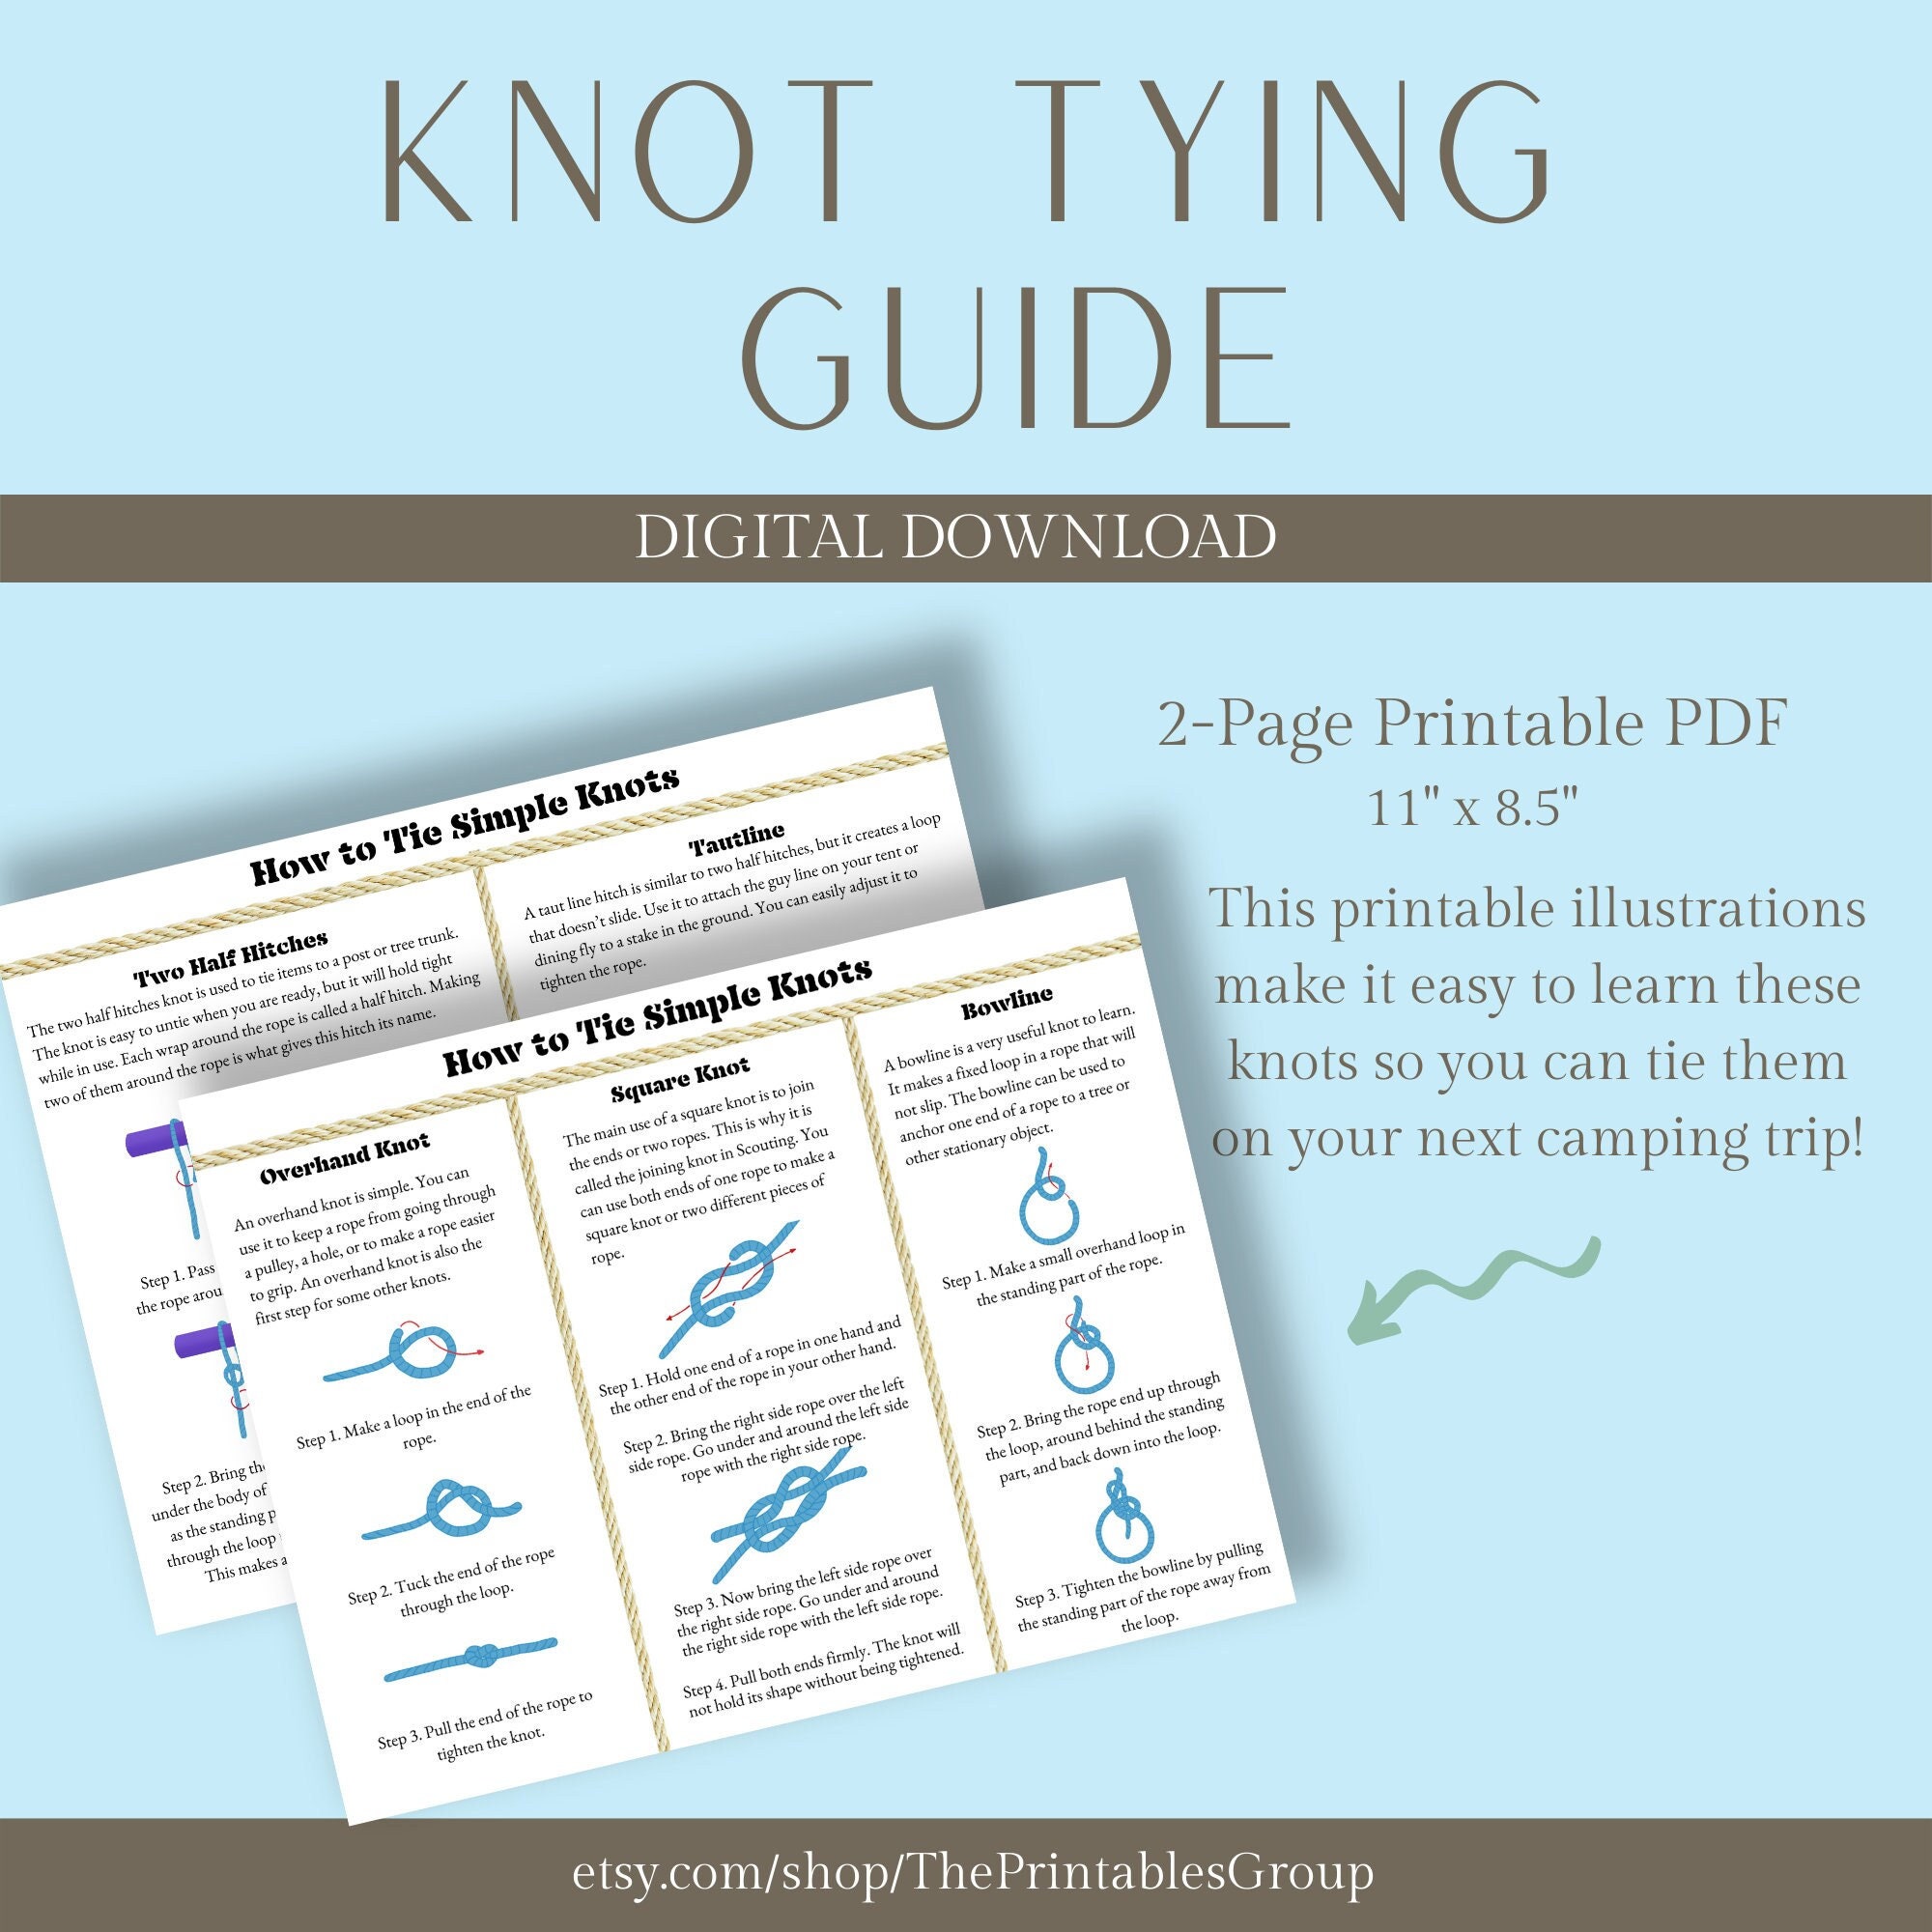 Buy Knot Tying Guide Printable How to Tie Knots Learning Materials